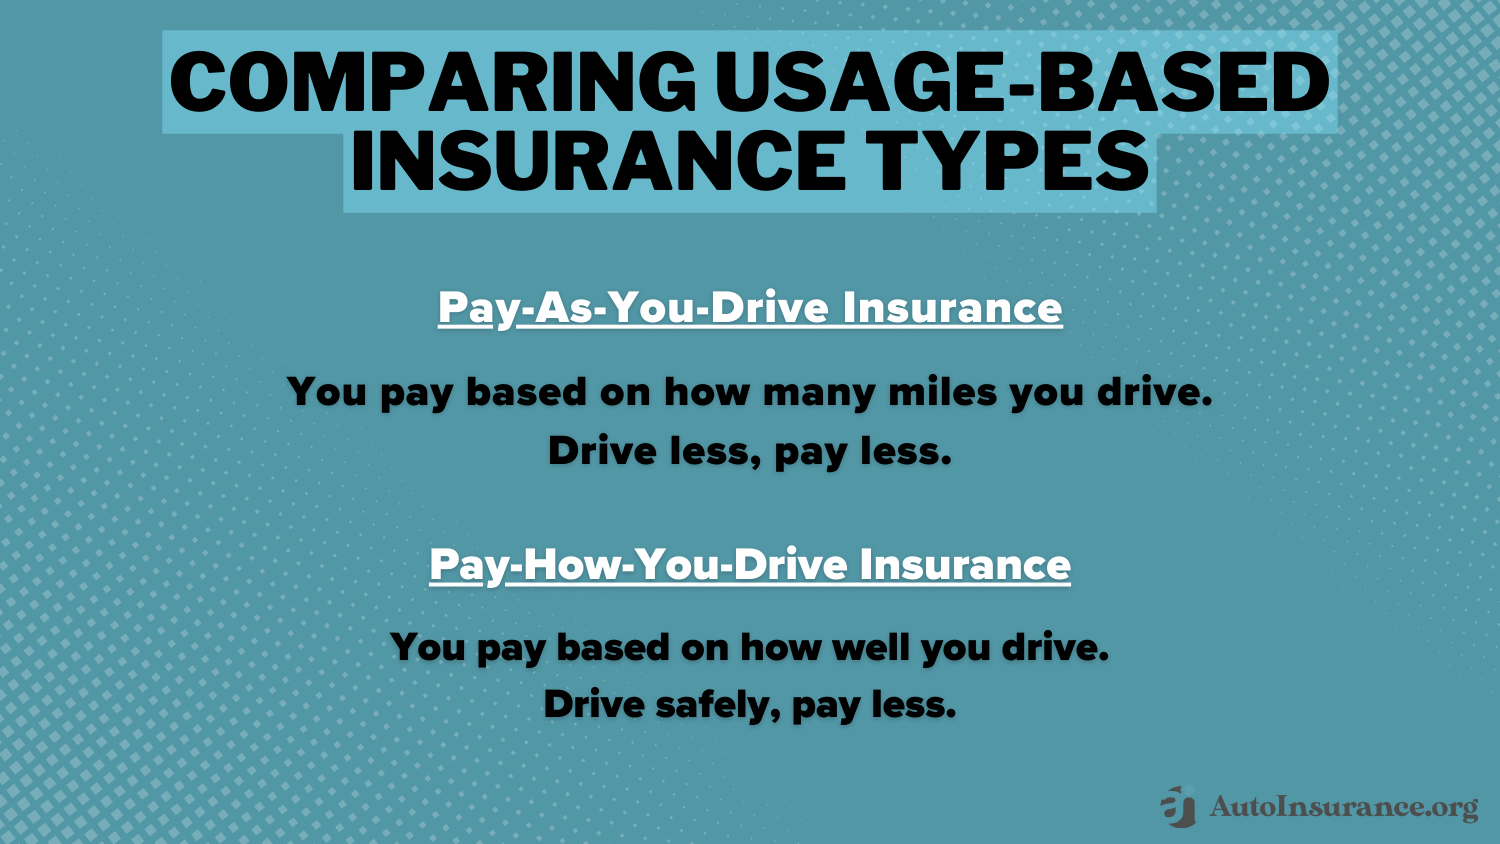 Progressive Snapshot Review: Comparing Usage-Based Insurance Types